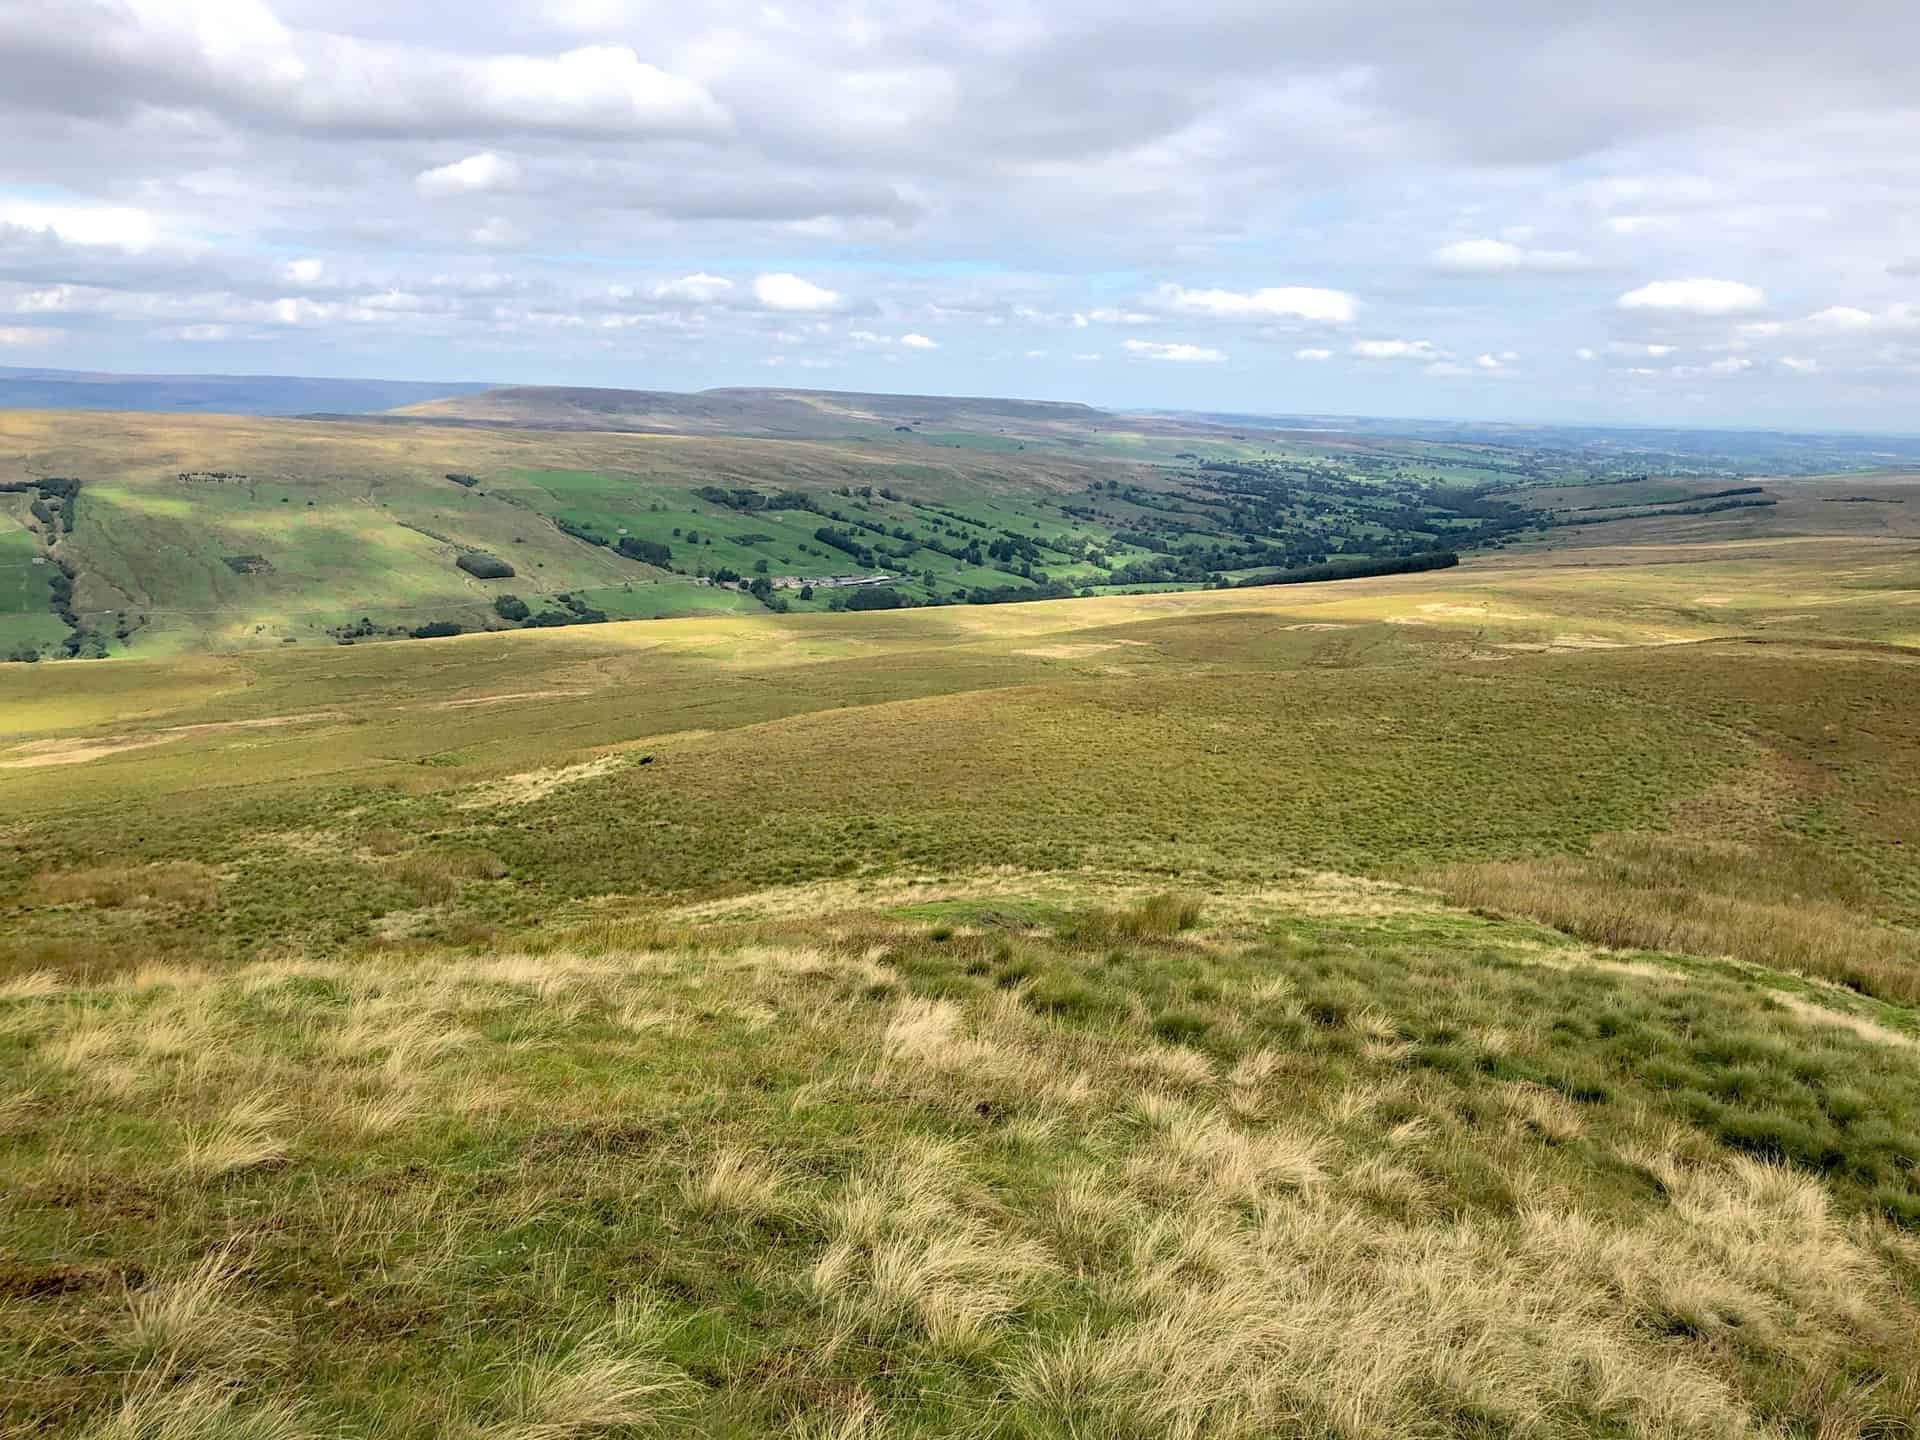 Superb views of Nidderdale from the southern flanks of Little Whernside.